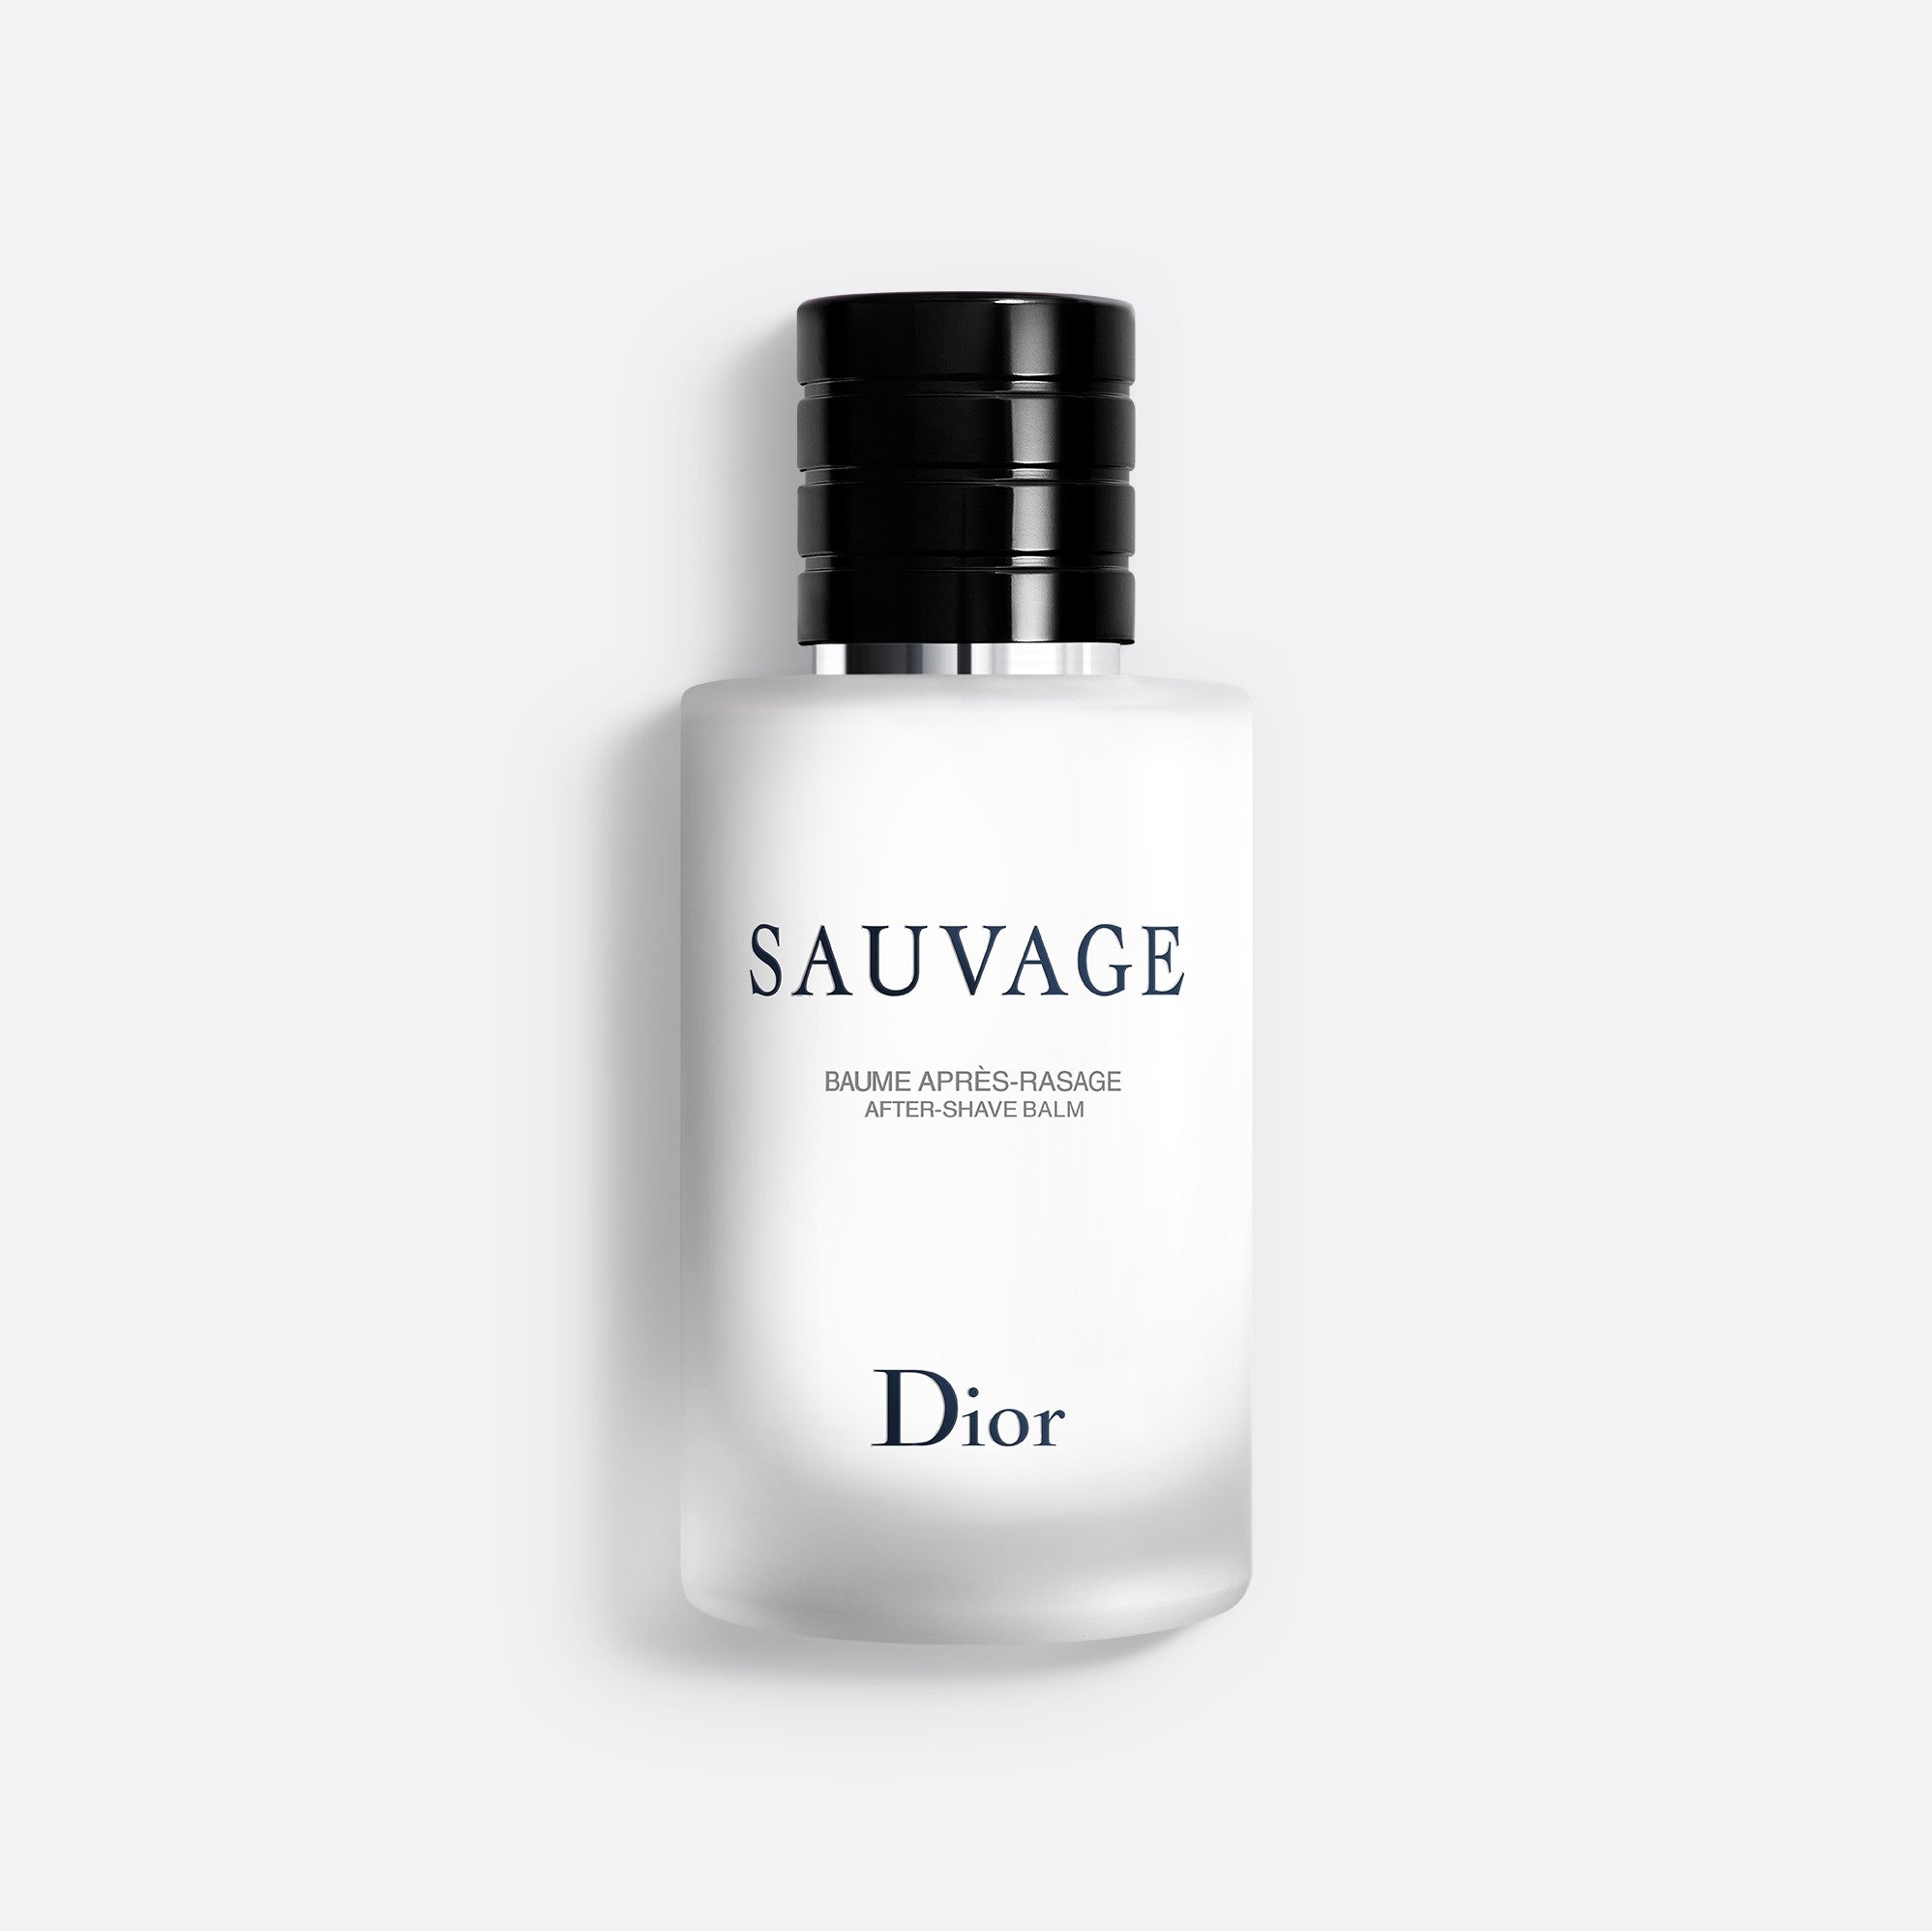 SAUVAGE | After-shave balm - moisturises and soothes